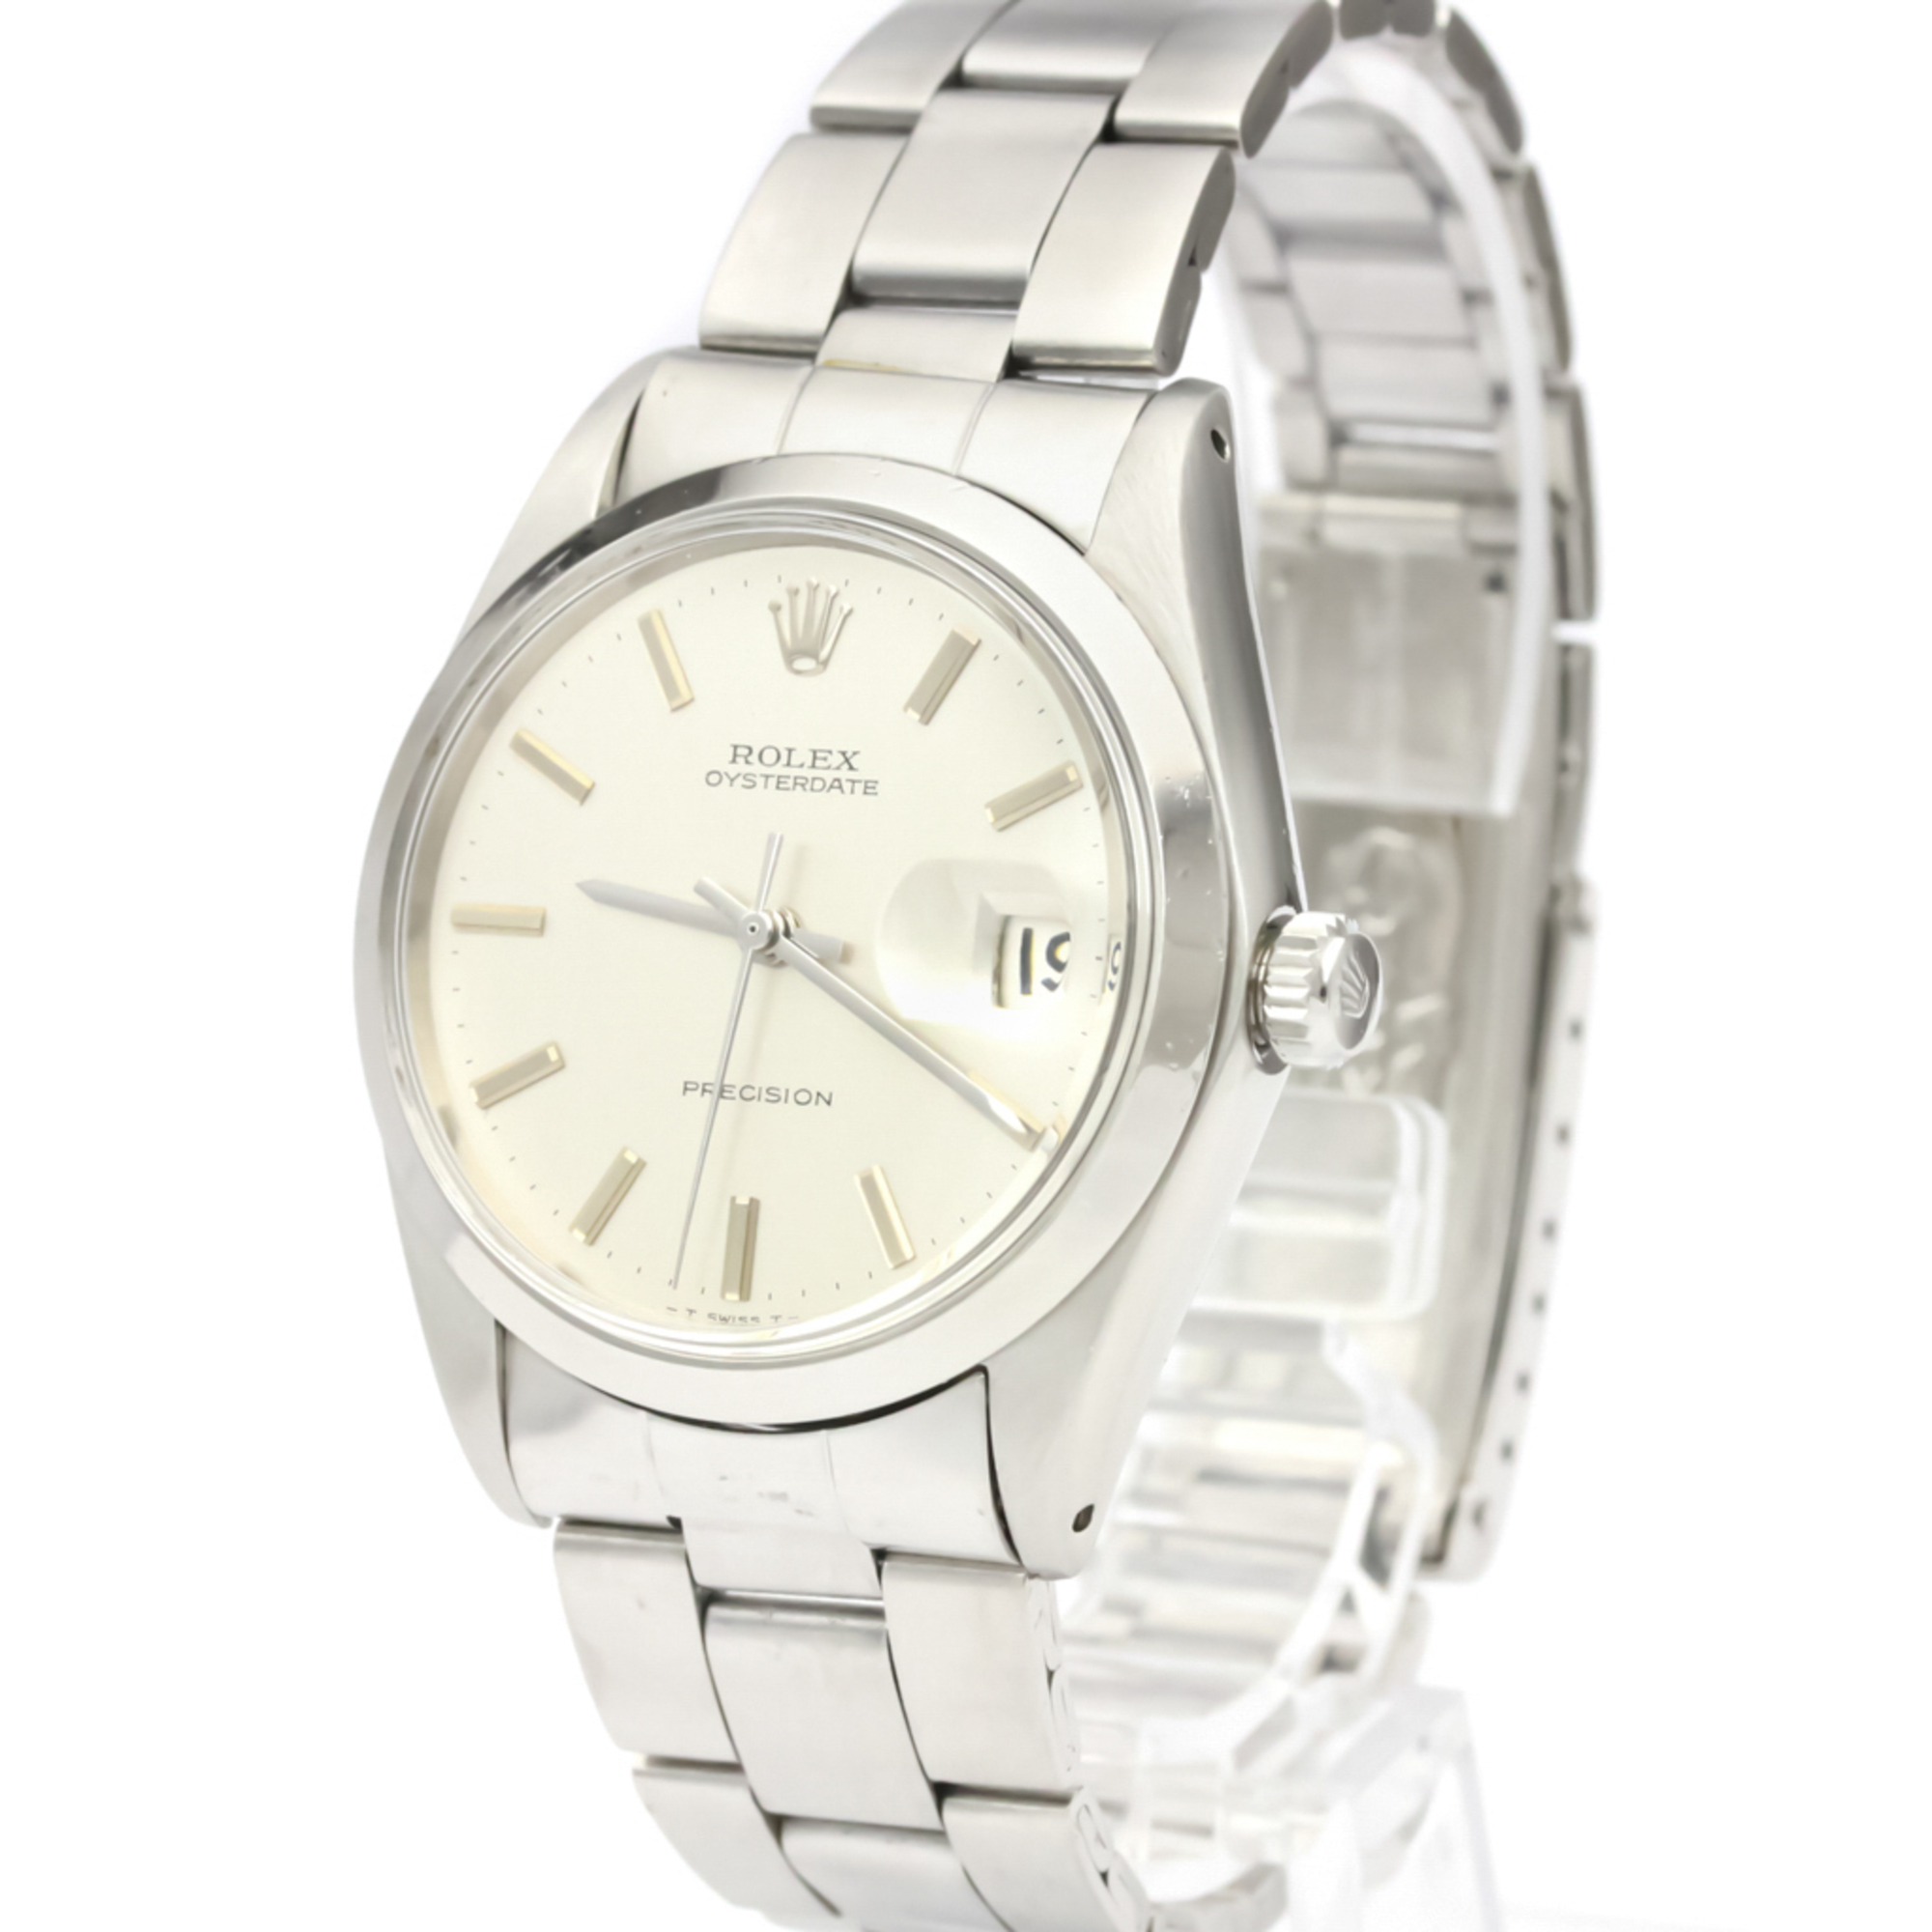 ROLEX Oyster Date Precision 6694 Steel Hand Winding Mens Watch